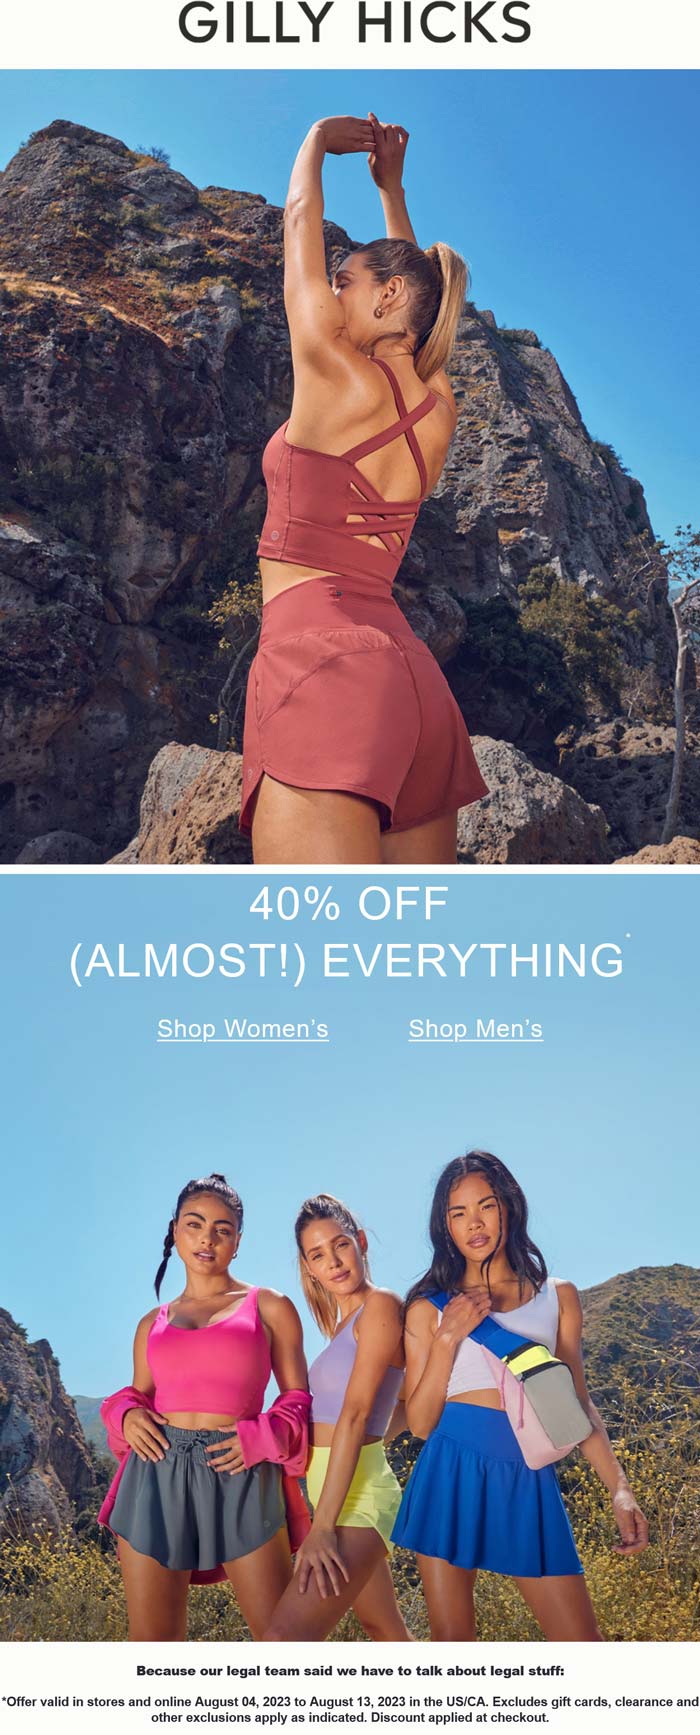 Gilly Hicks stores Coupon  40% off everything at Gilly Hicks, ditto online #gillyhicks 